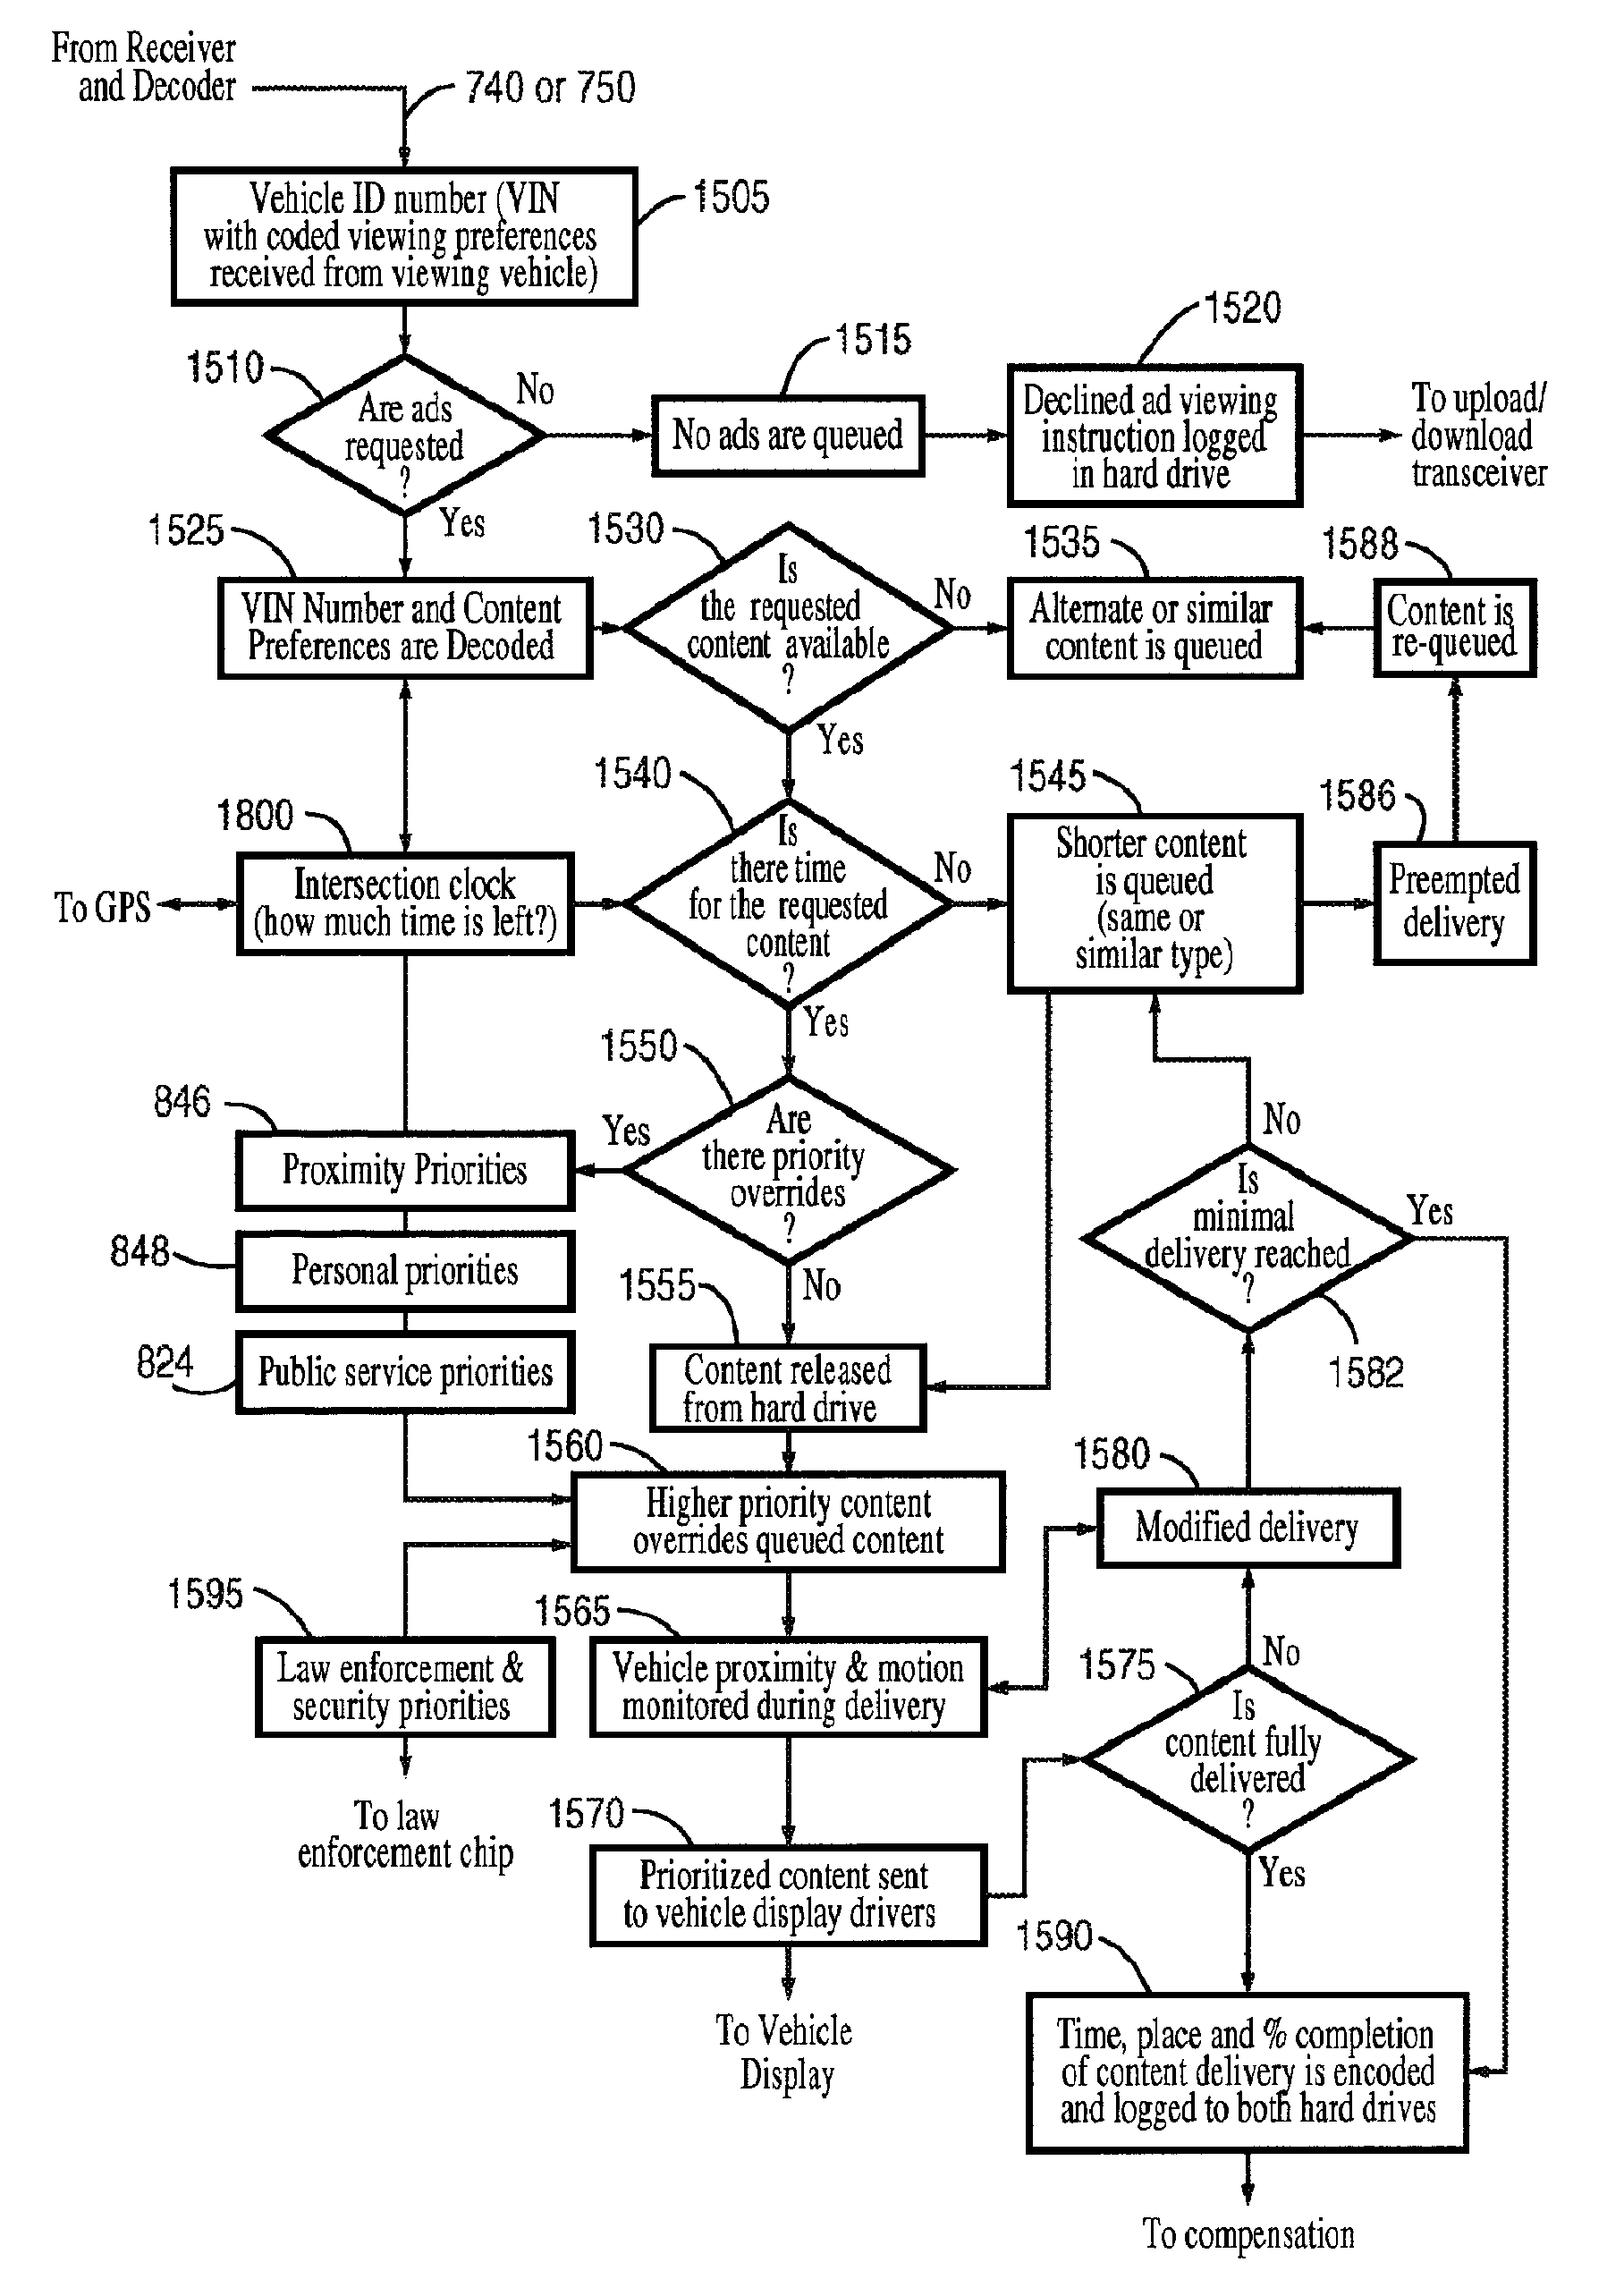 System and method for obtaining revenue through the display of hyper-relevant advertising on moving objects